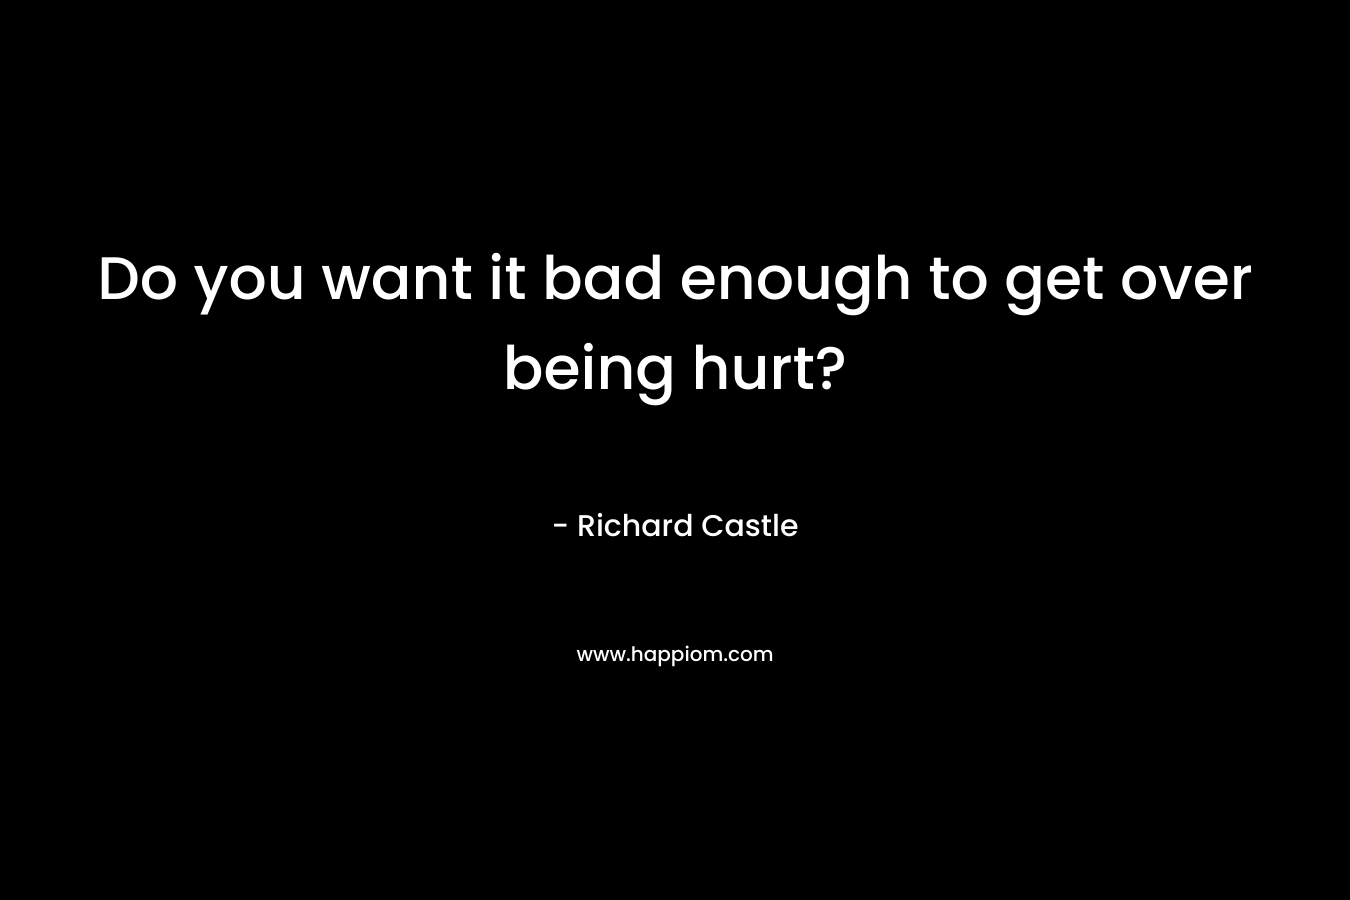 Do you want it bad enough to get over being hurt?